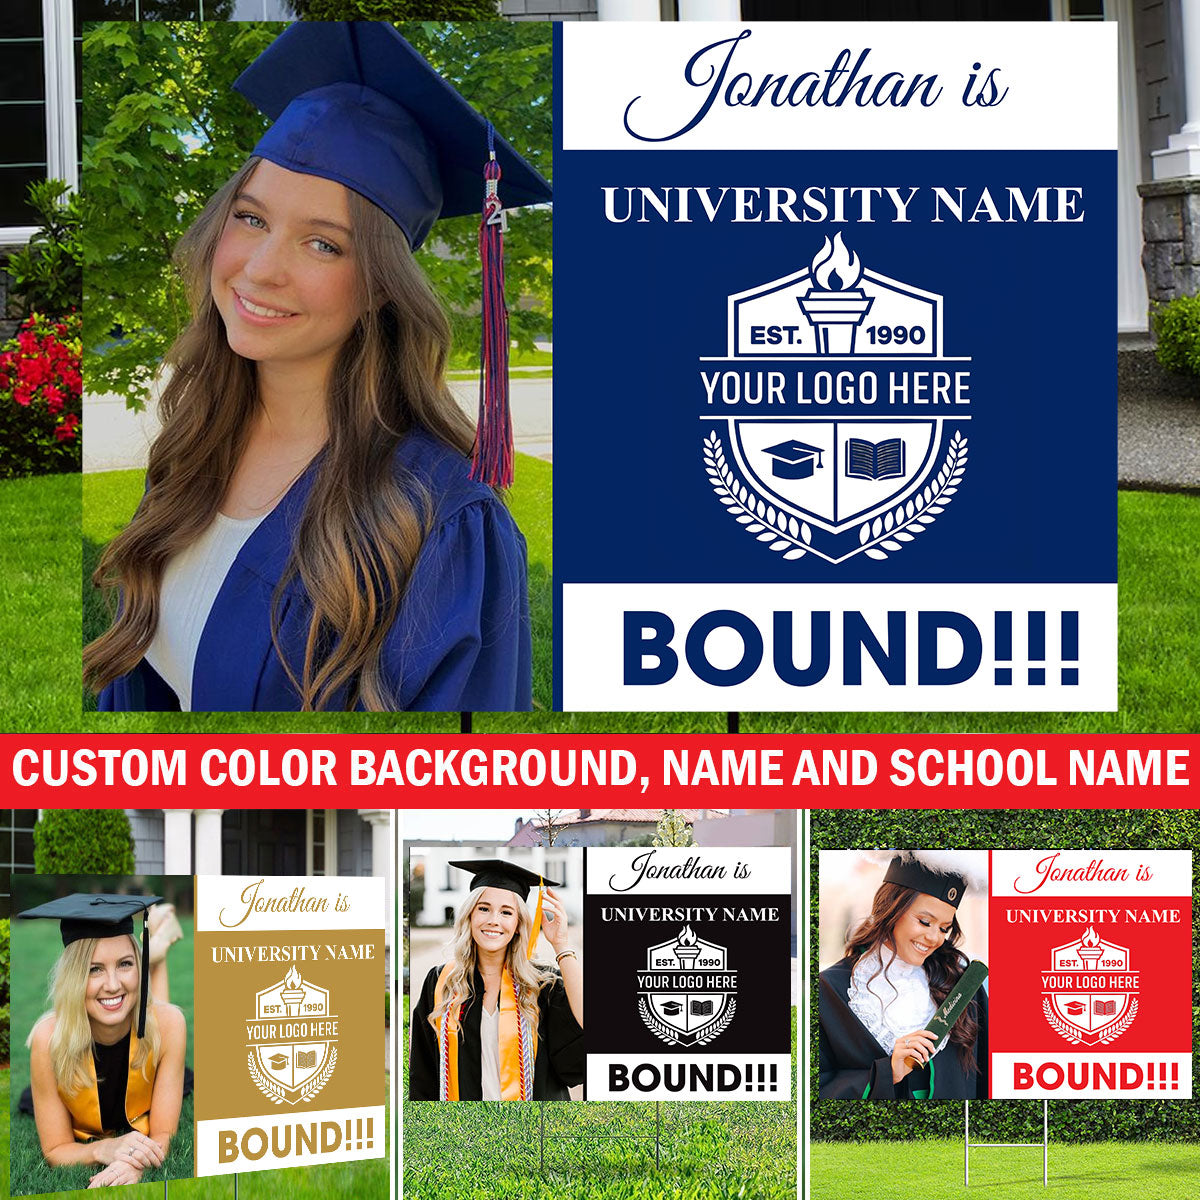 Congrats Custom Background, Logo, Photo And Texts - Personalized Lawn Sign, Yard Sign, Graduation Gift